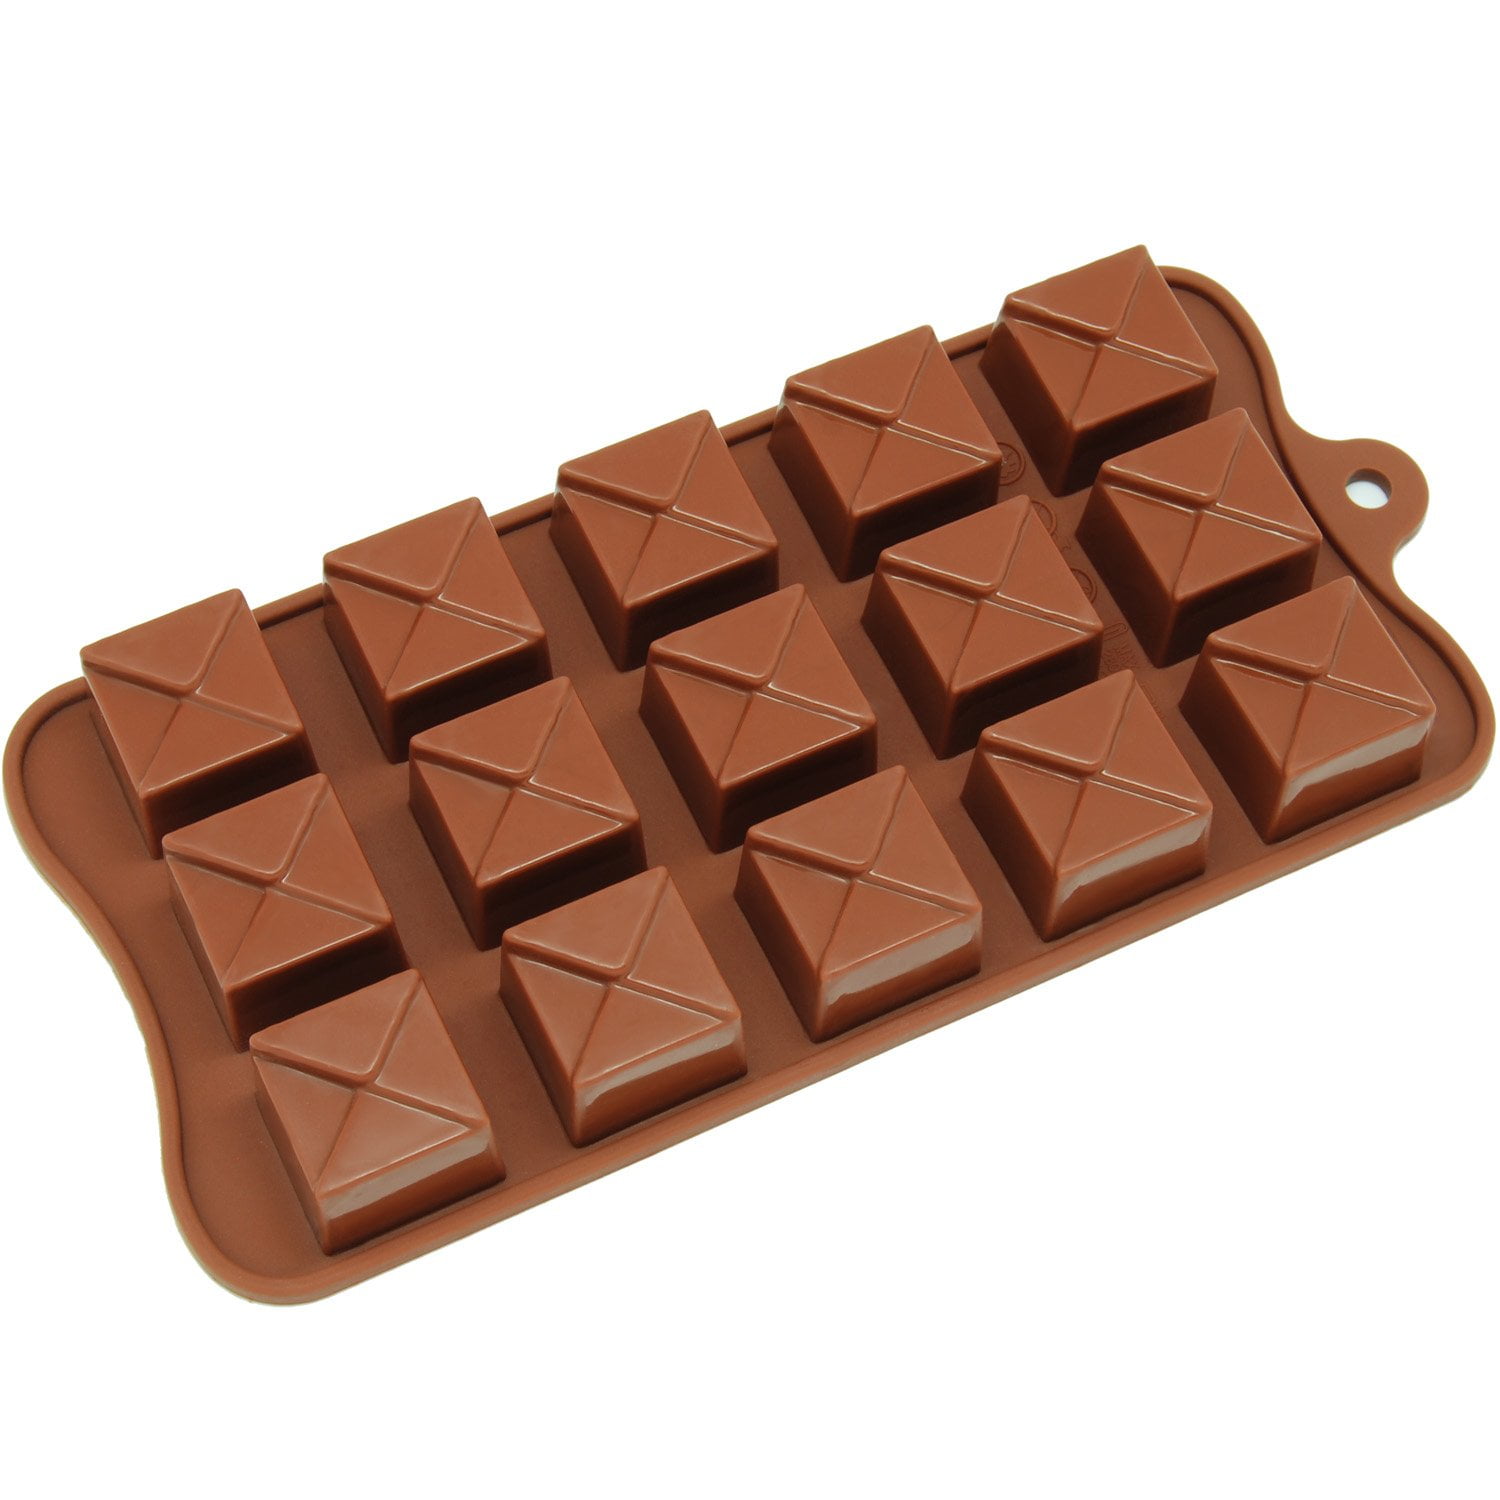 SliconMoldFun Chocolate Molds Silicone Candy Molds - 19 Shapes Silicone Molds BPA Free Nonstick Gummy Molds 6 Packs